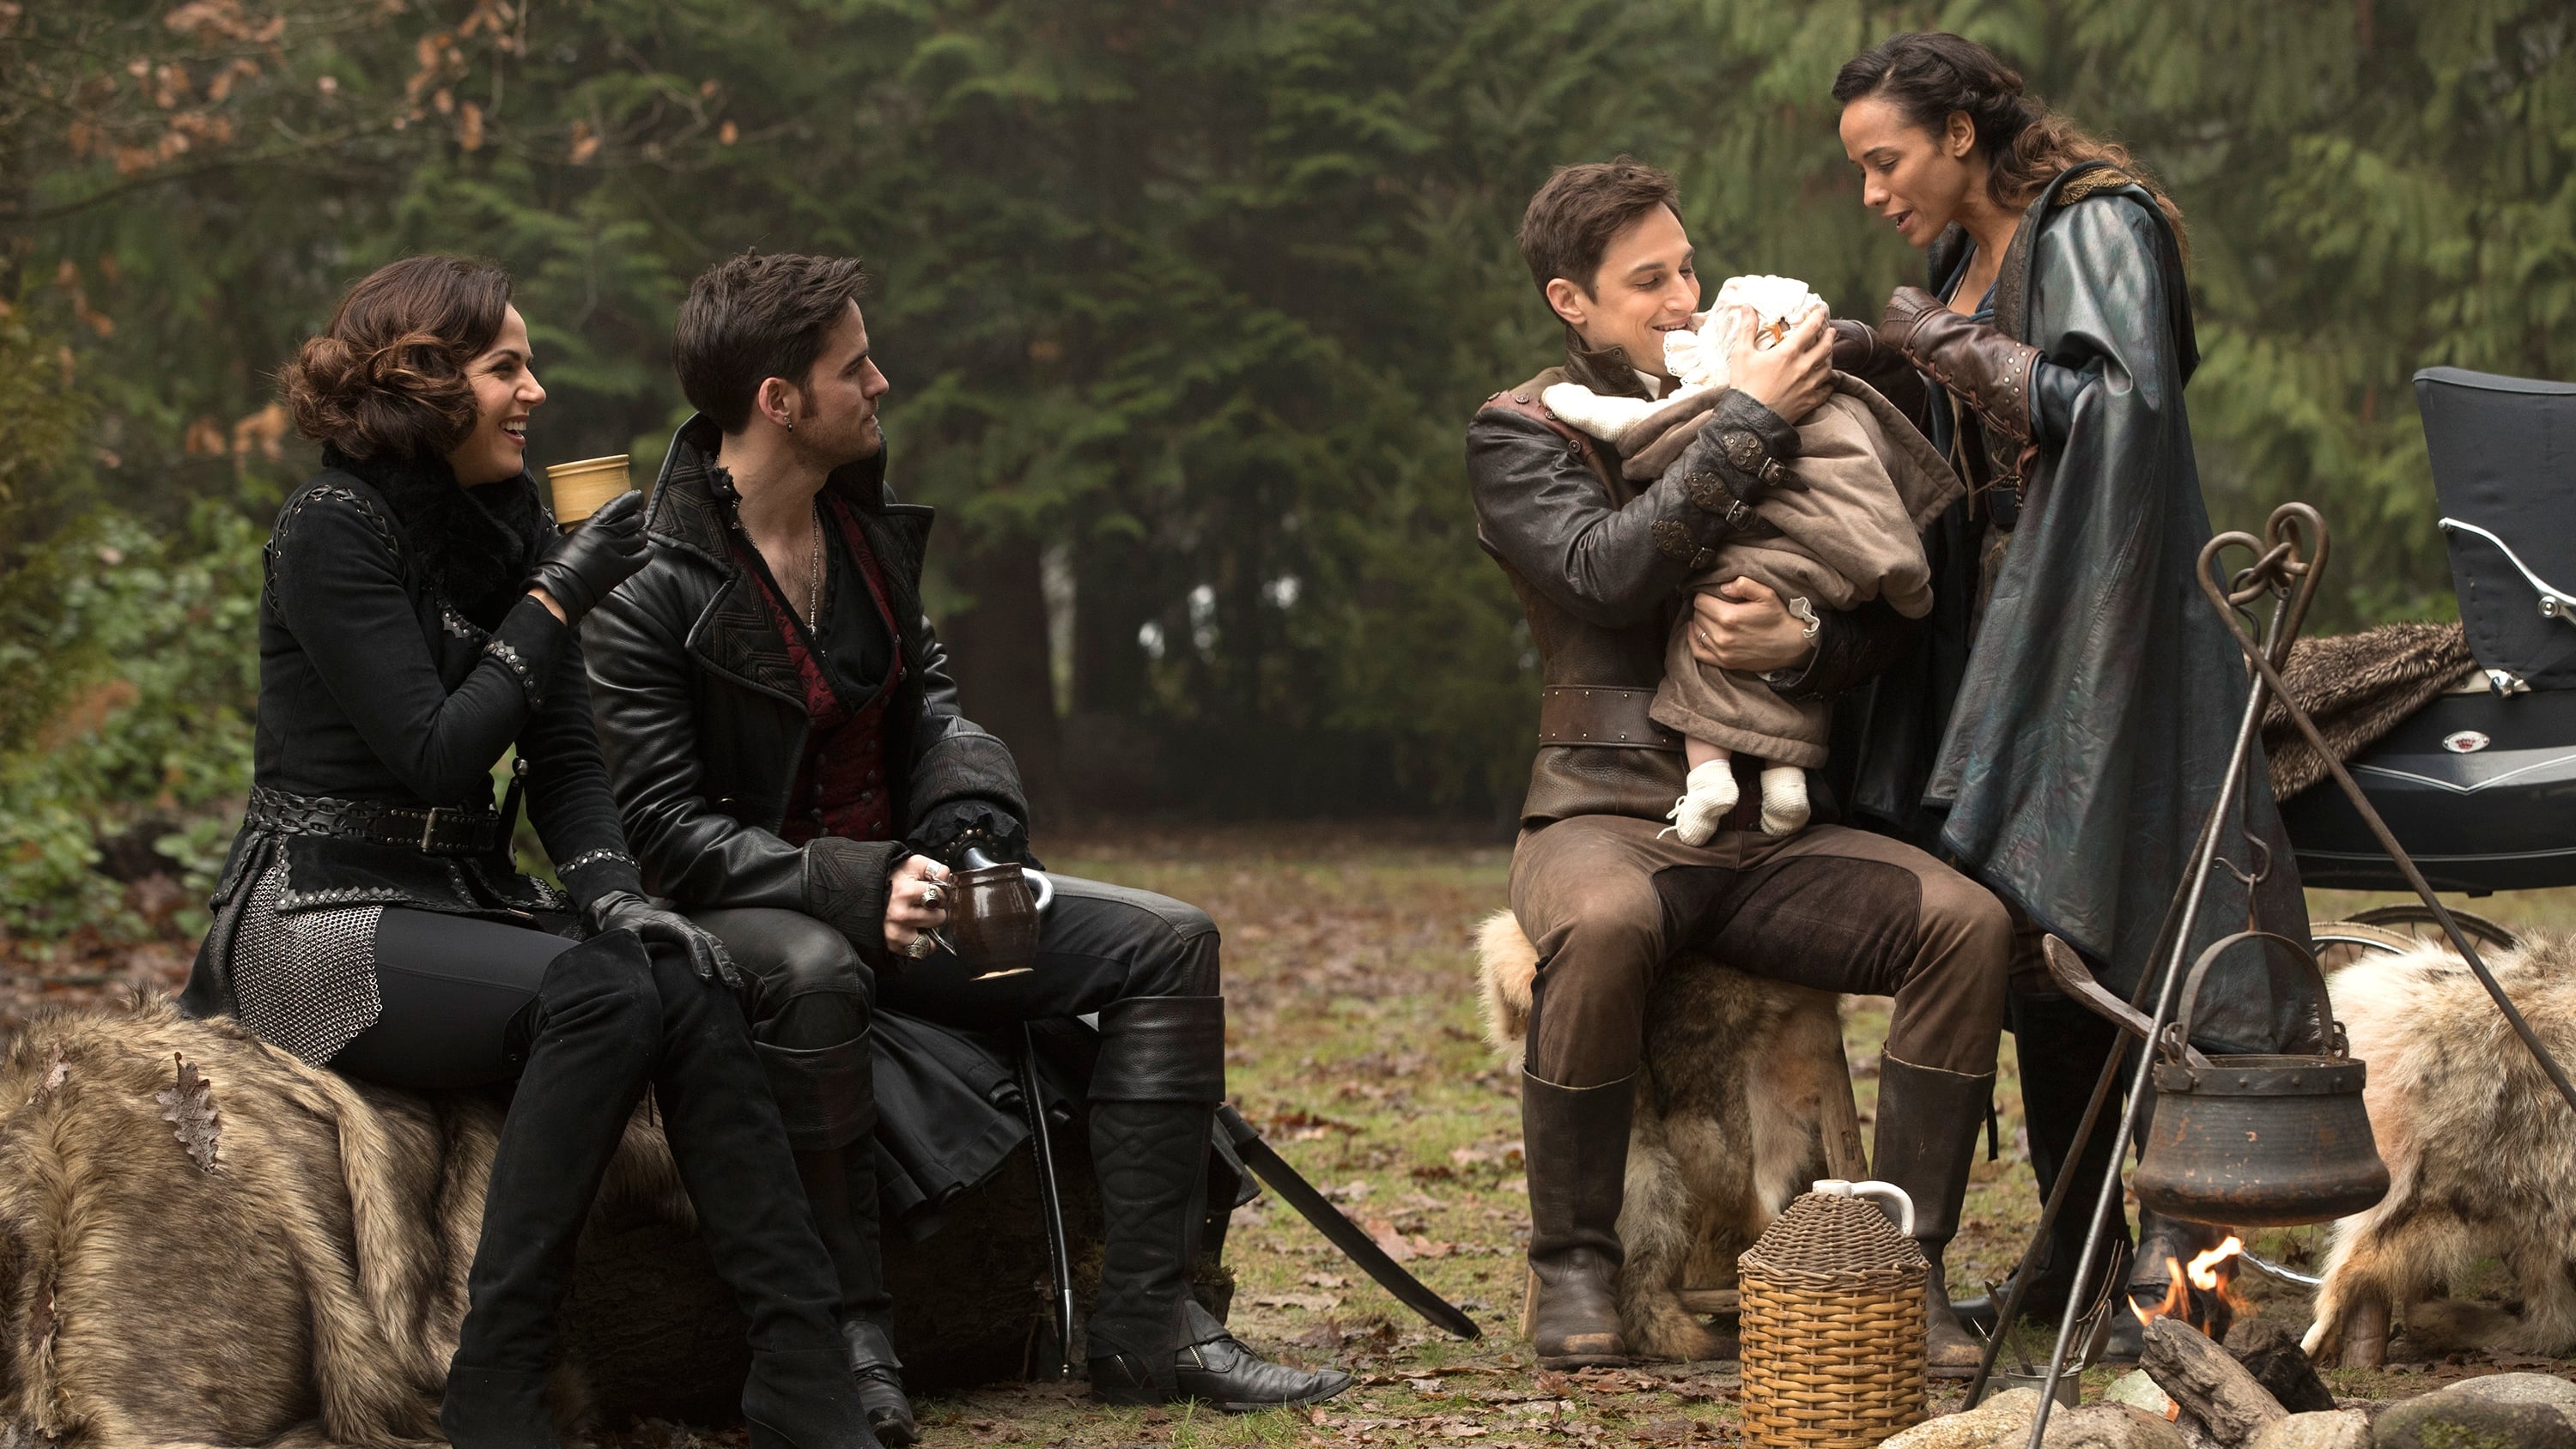 Once upon a time season 2 episode 16 torrent raul gardini blu notte torrent